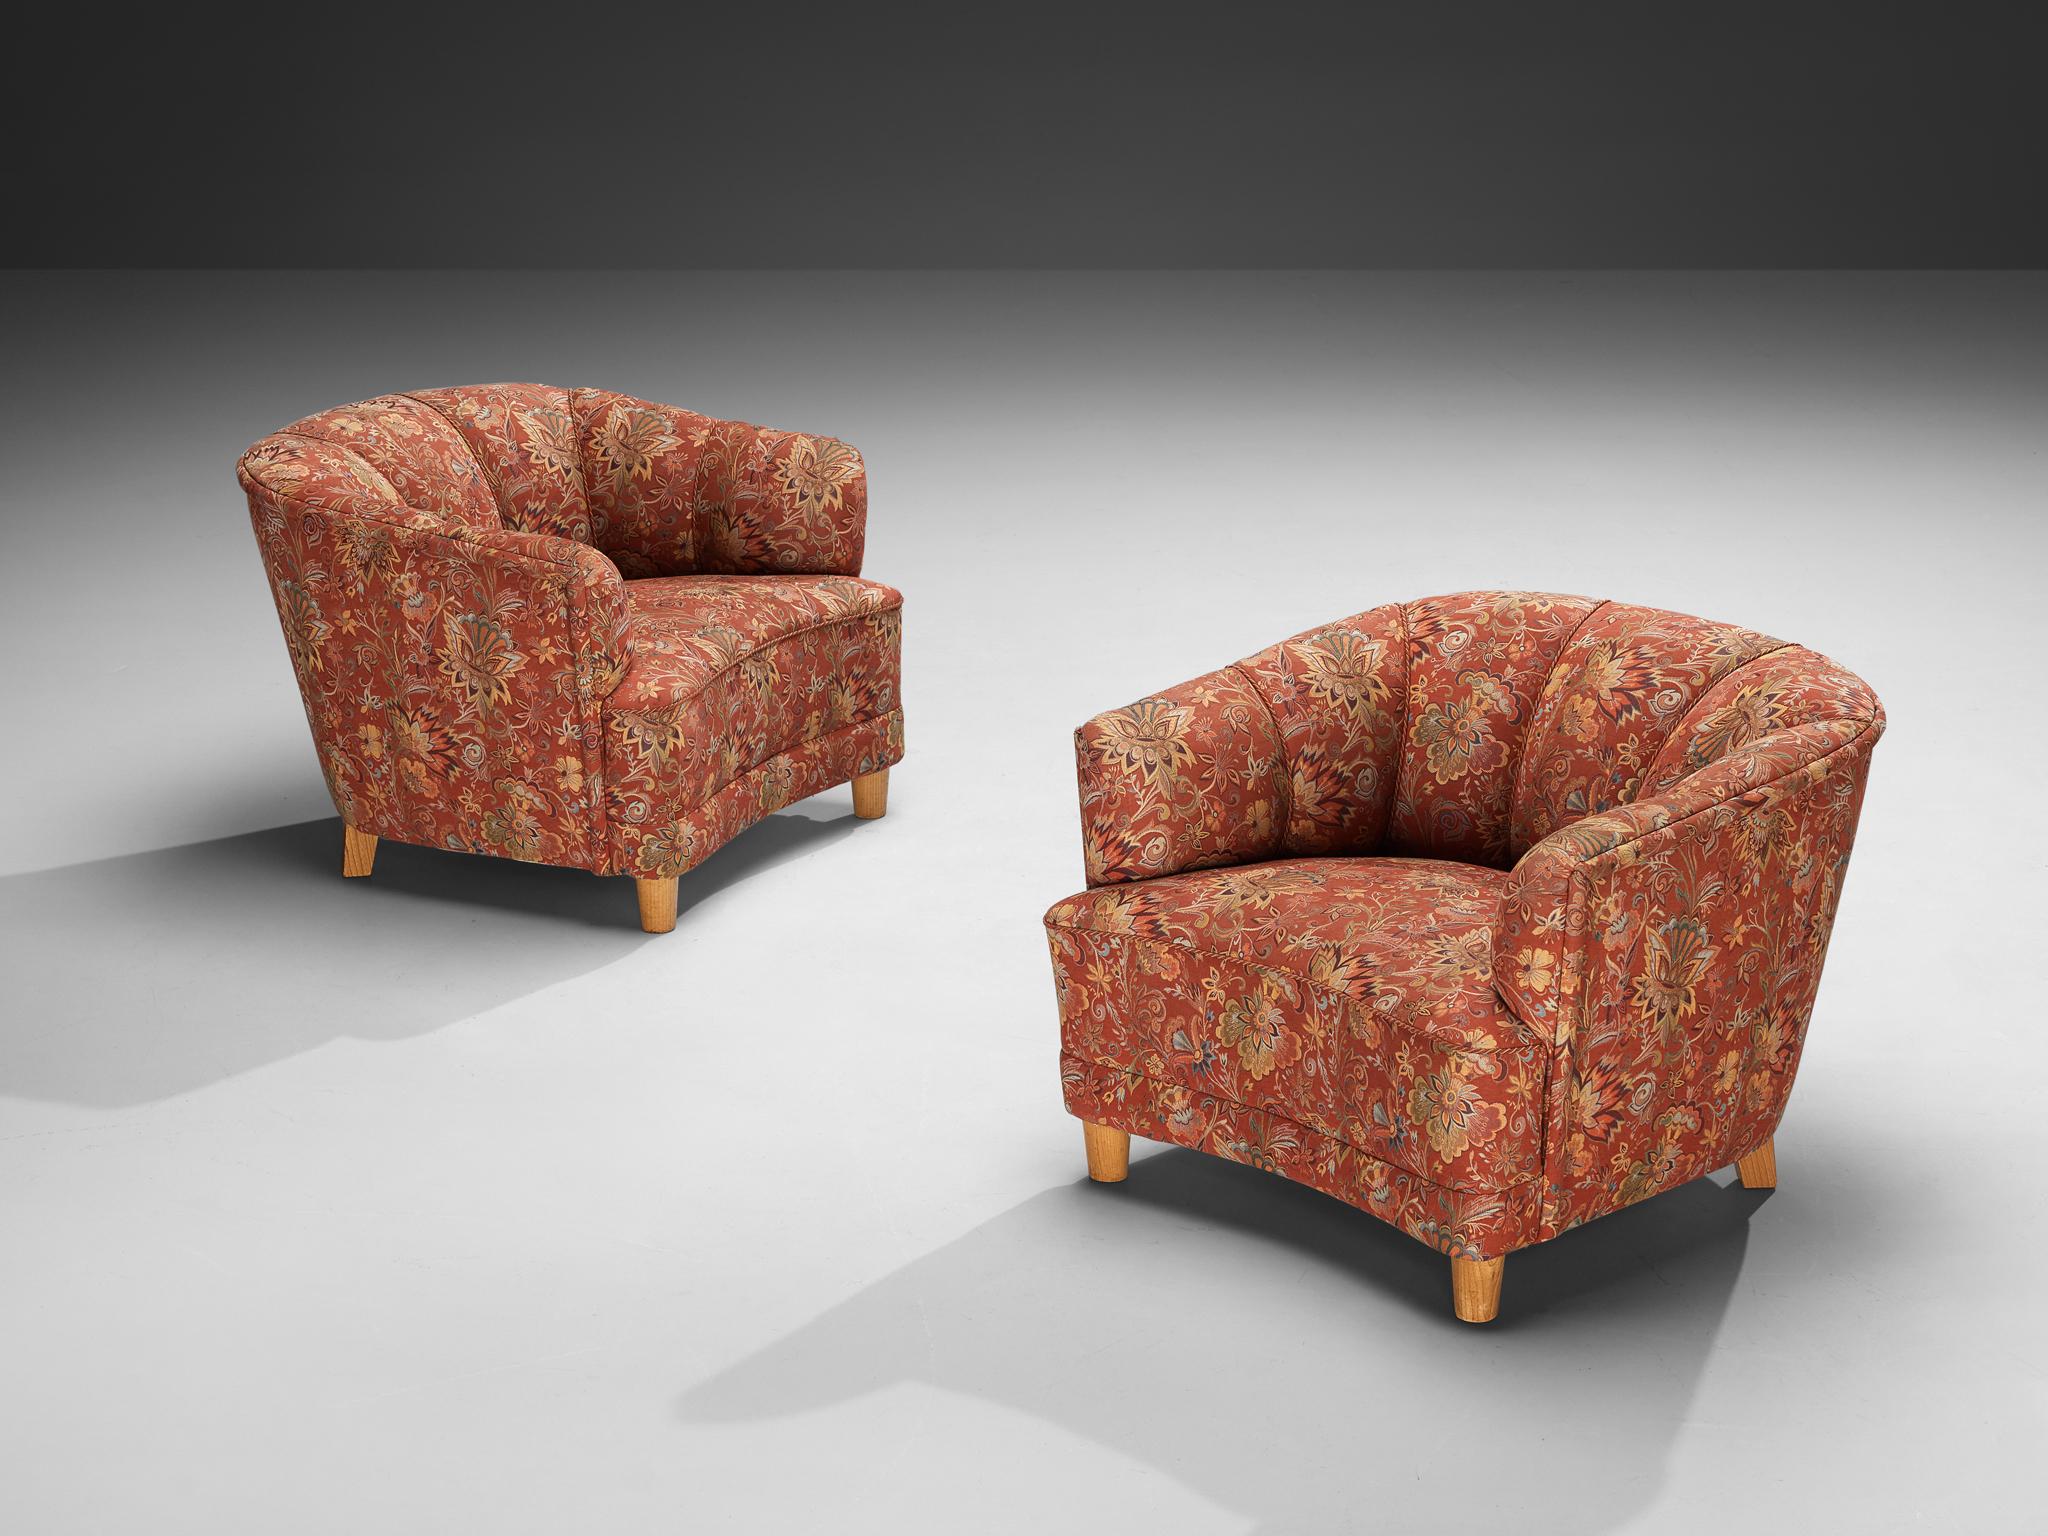 Otto Schulz for Boet Pair of Lounge Chairs in Floral Upholstery